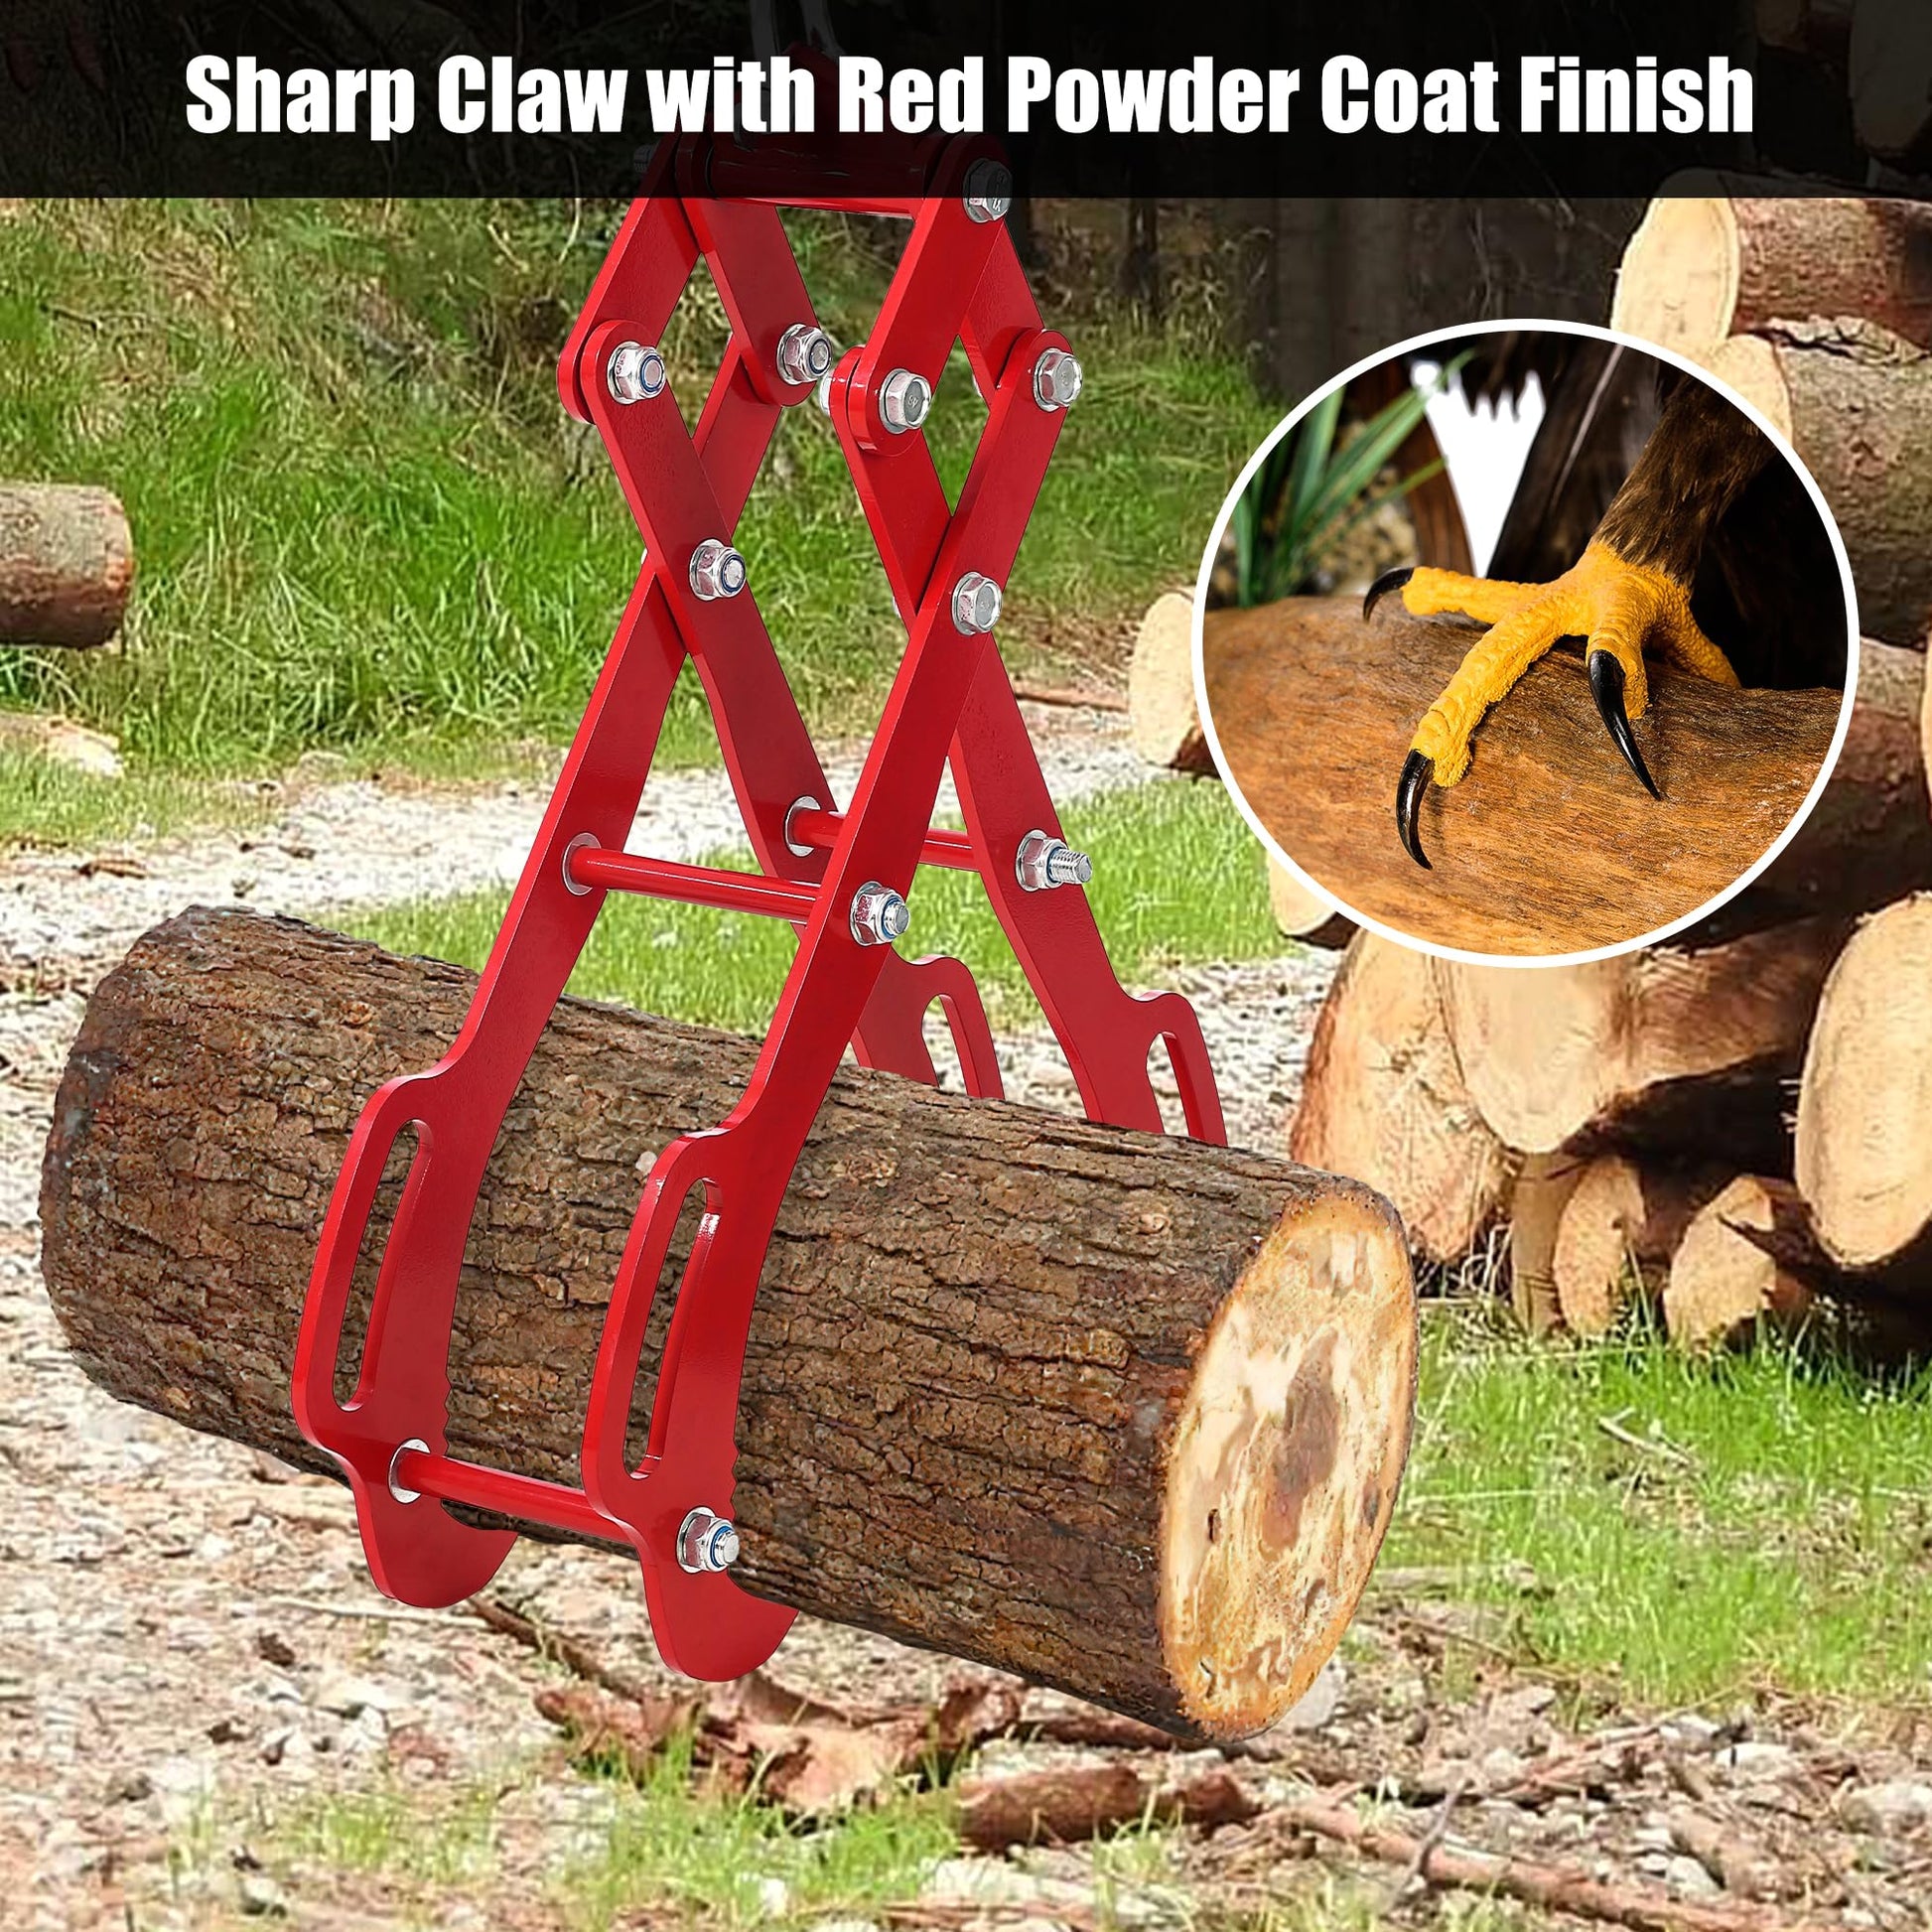 Log Lifting Tongs,4 Claw Timber Heavy Duty Solid Steel,Tractor Grapple,Wooden Tongs,Swivel Dragging Steel Tongs Log Lifting,Lumber Skidding Tongs Logging Grabber